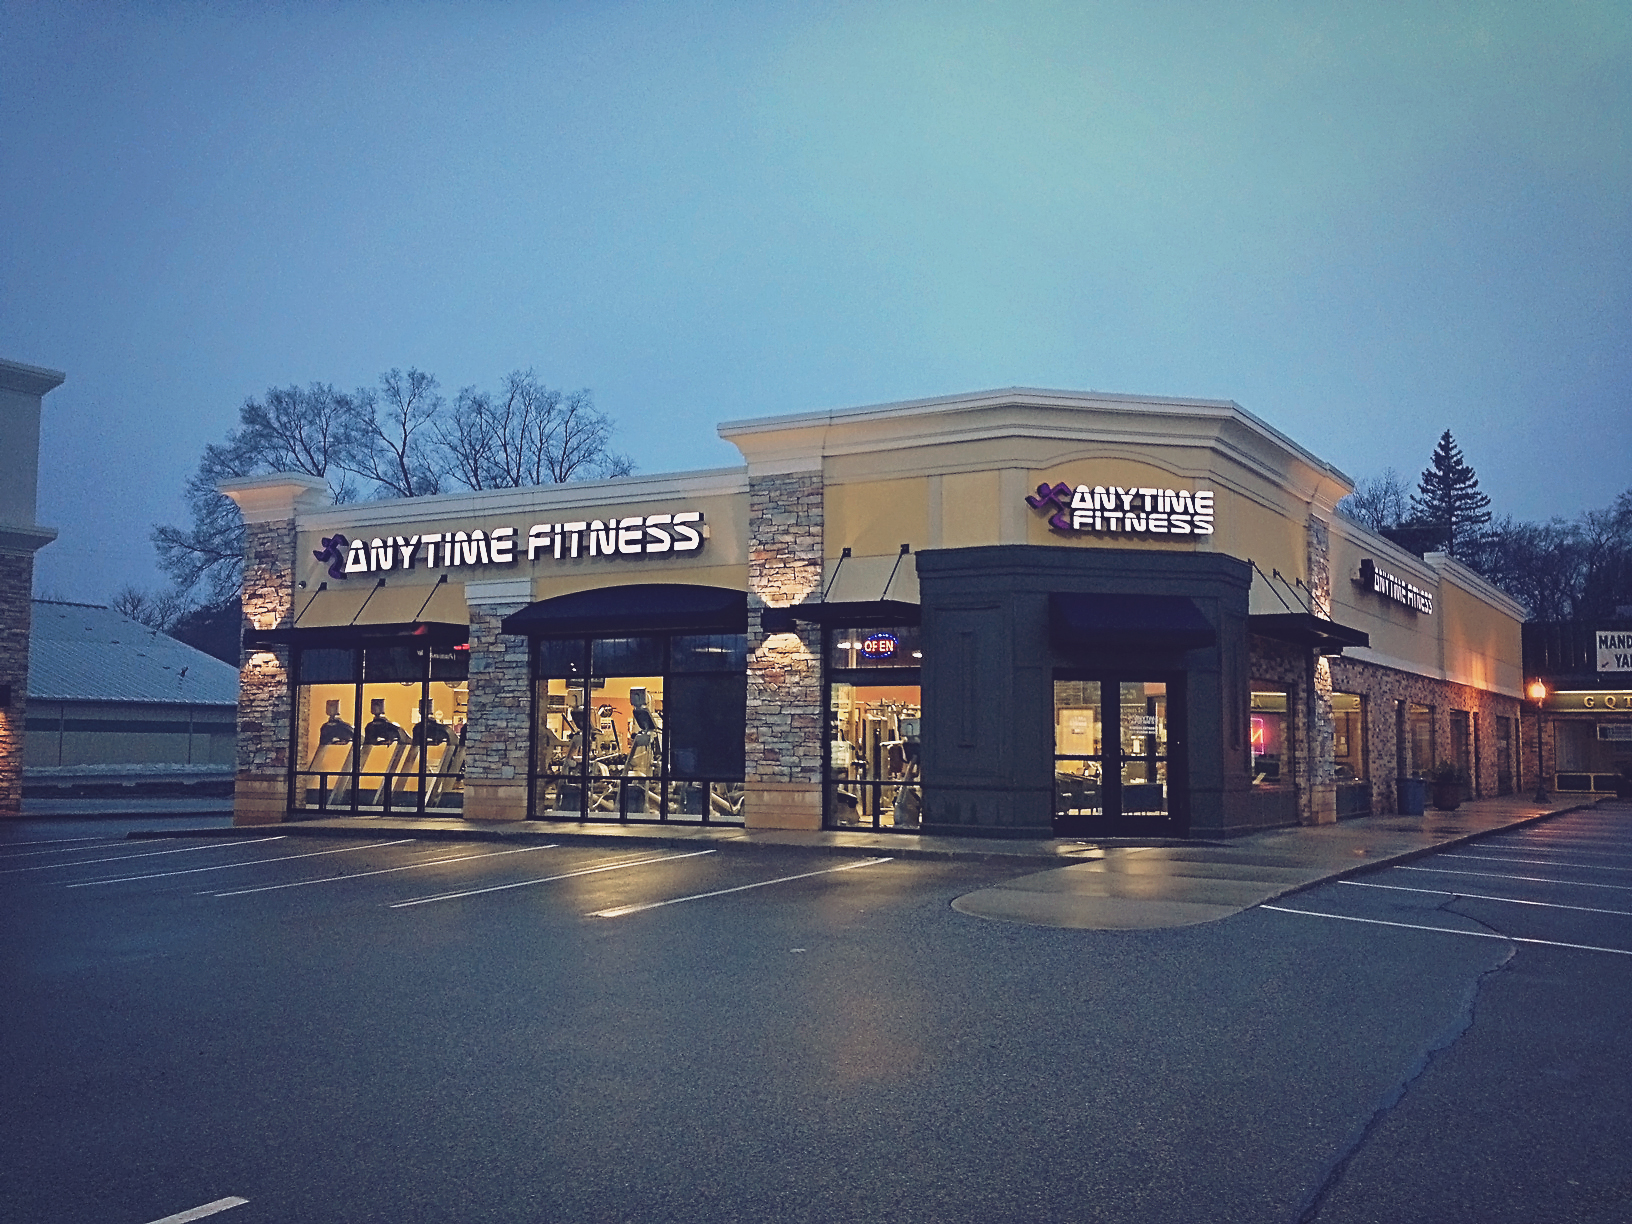 ANYTIME FITNESS Franchis